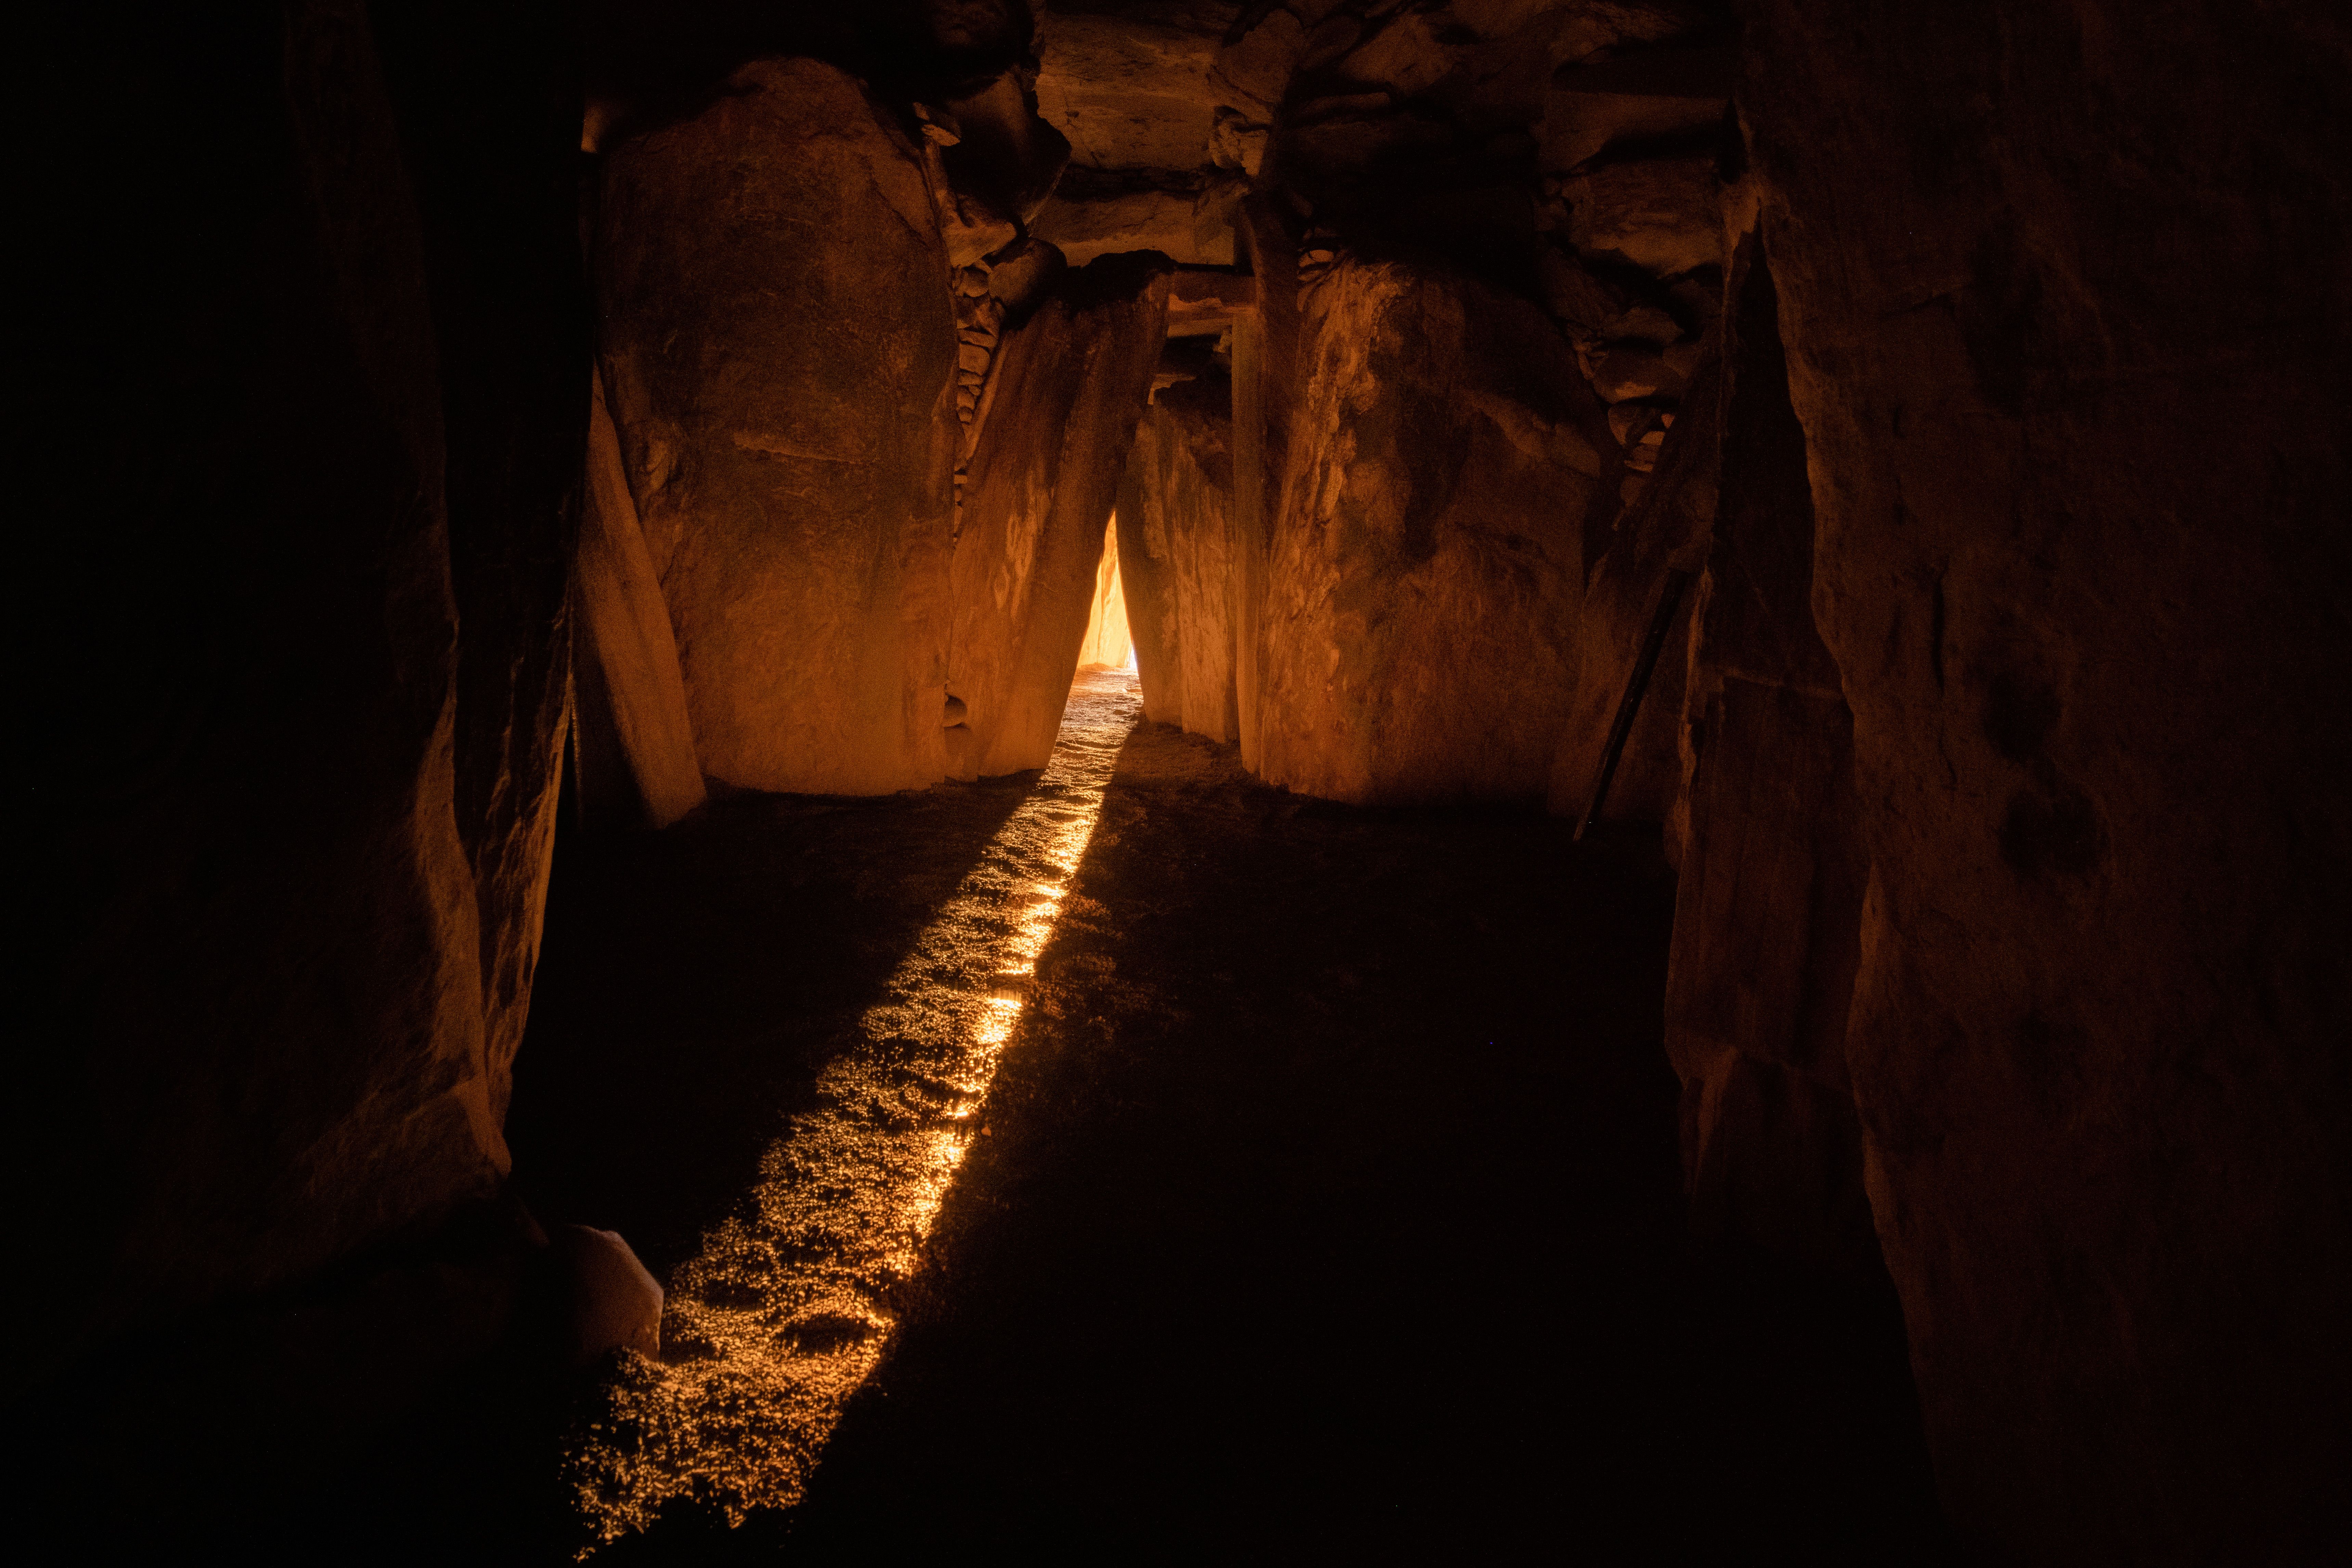 LET IN THE LIGHT: The turn of the year at the ancient monument of Newgrange